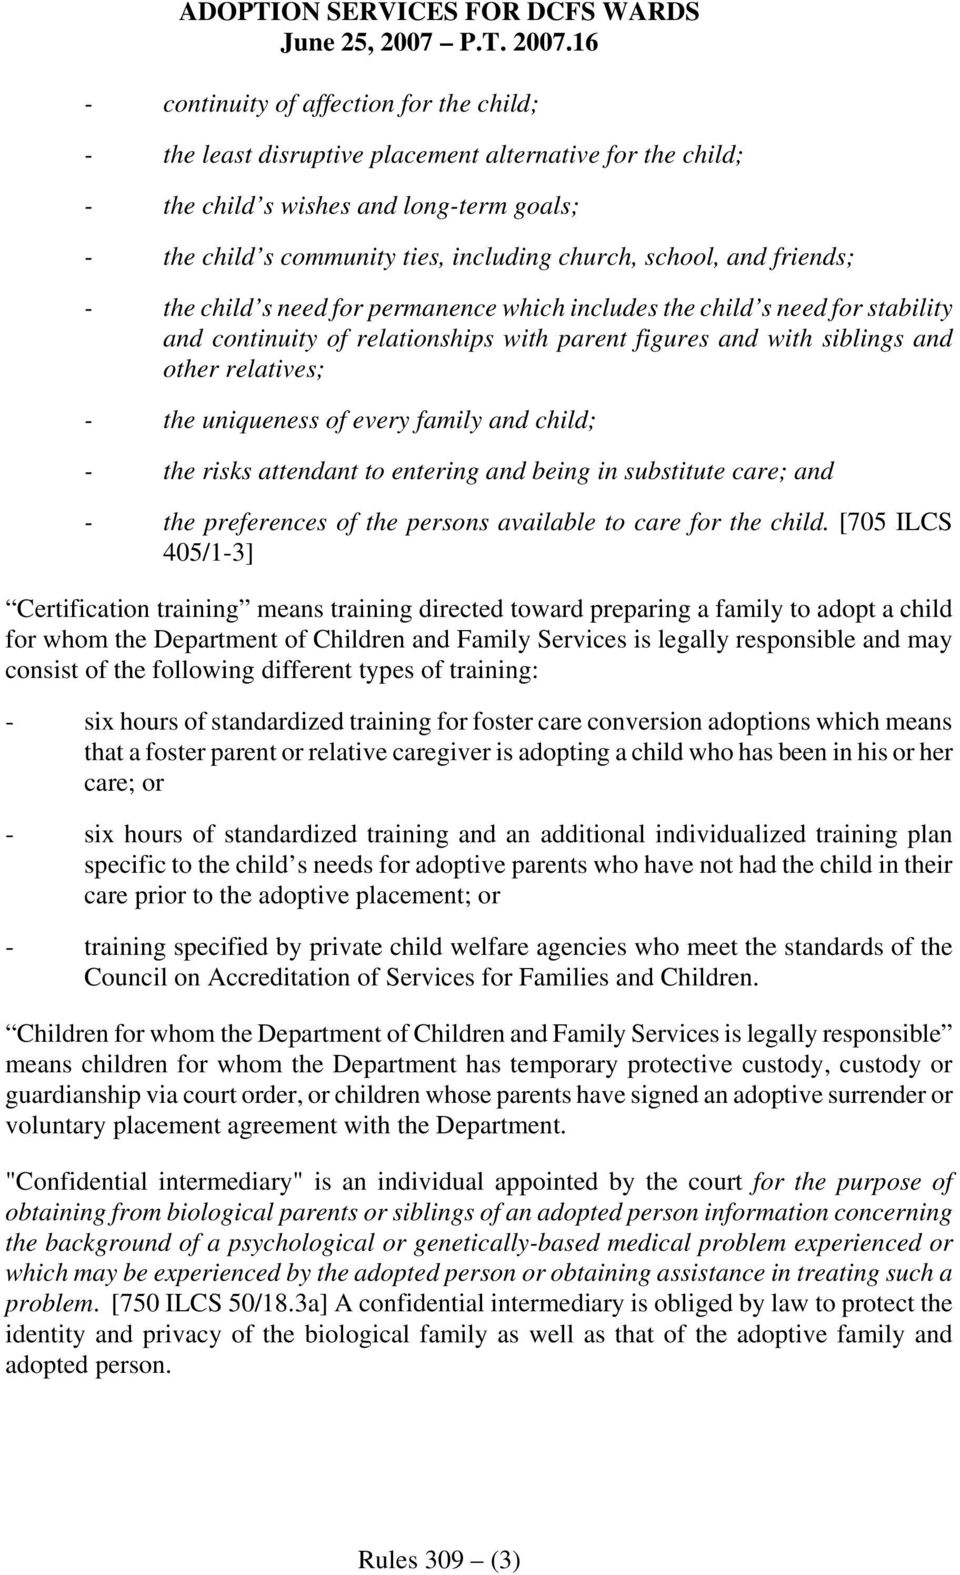 uniqueness of every family and child; - the risks attendant to entering and being in substitute care; and - the preferences of the persons available to care for the child.